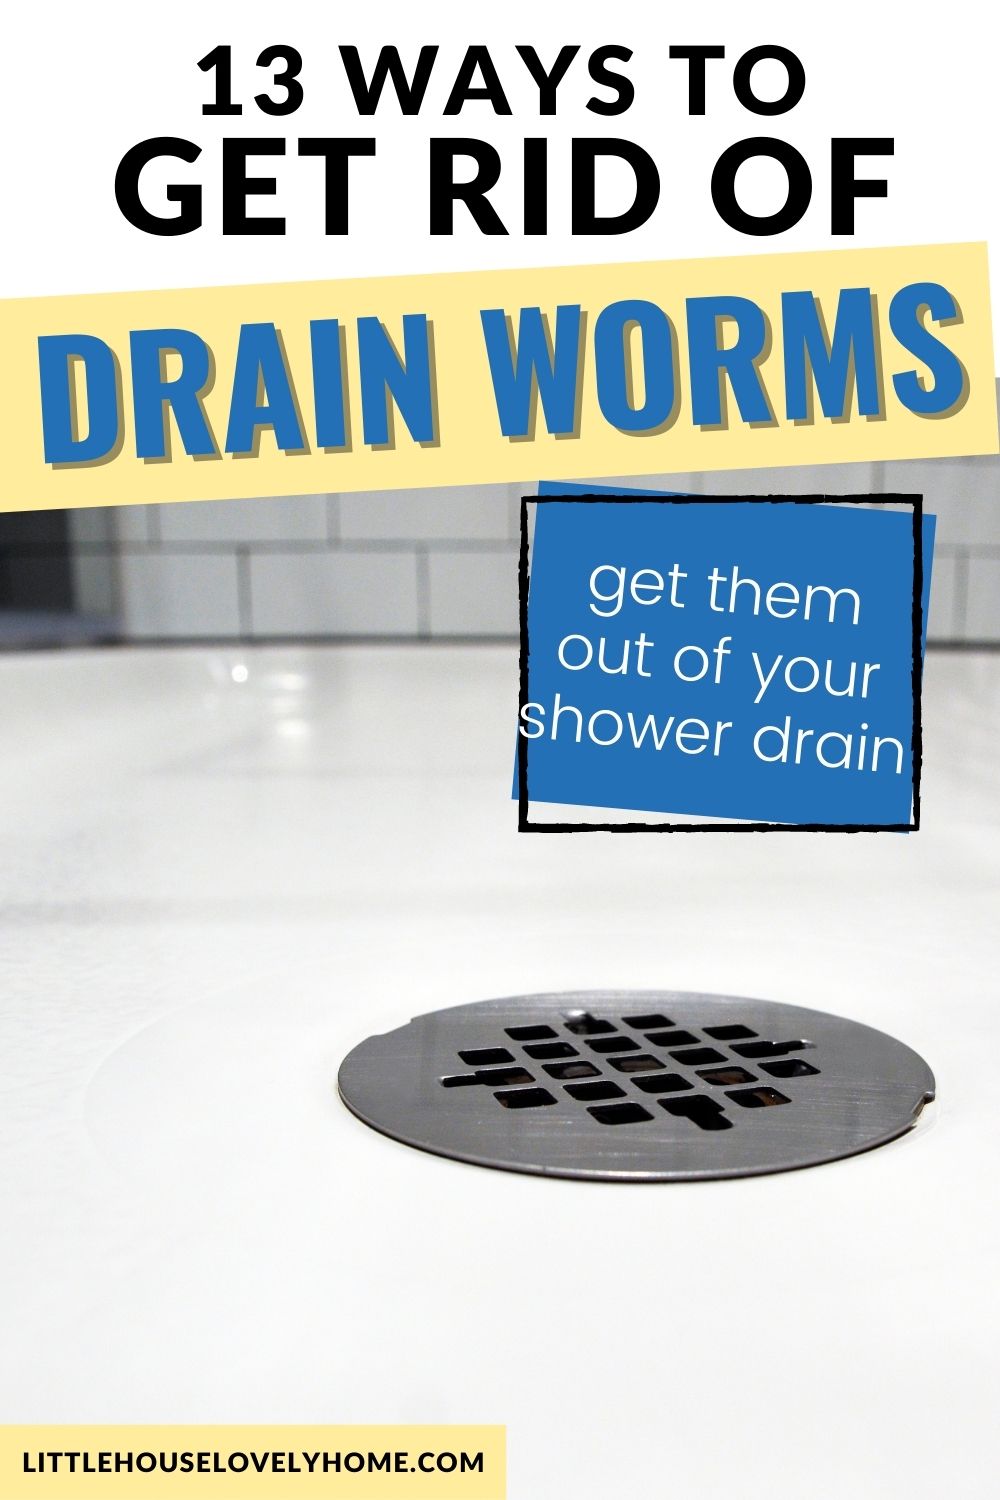 picture of shower drain with text overlay that reads 13 ways to get rid of drain worms